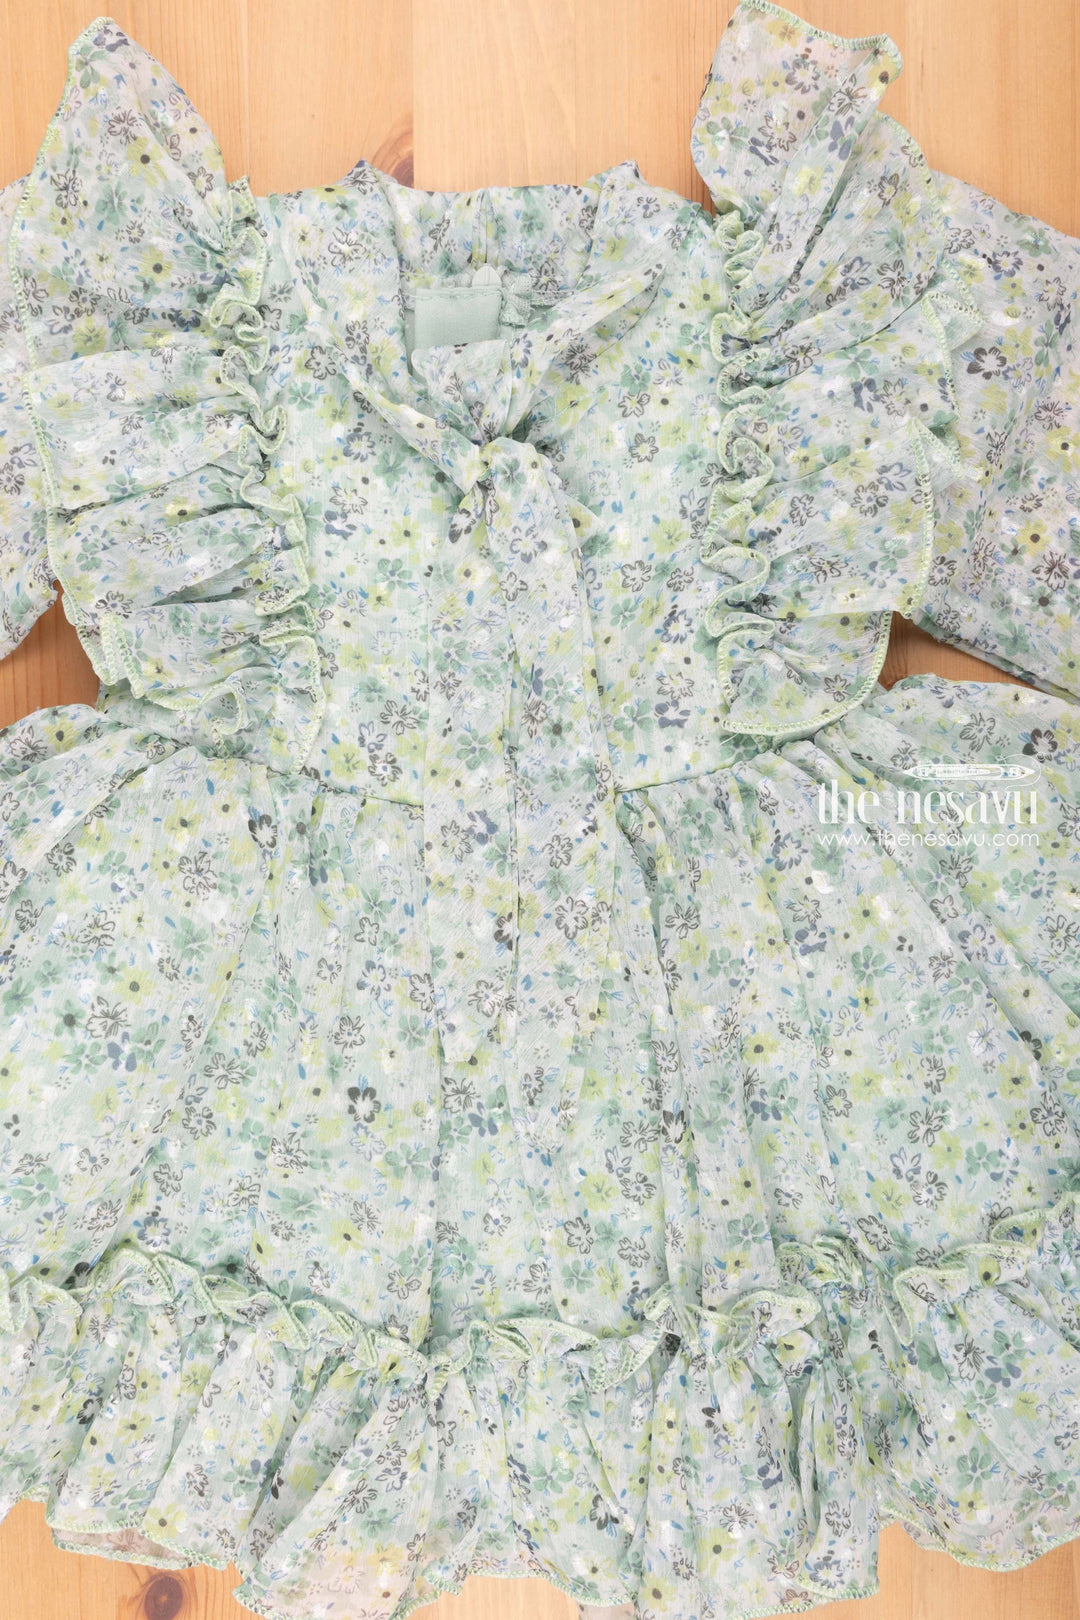 The Nesavu Girls Fancy Frock Enchanting Green Blossoms Crepe Flared N Pleated Frock with Tie Neck for Girls Nesavu Blossoming Beauty: Green Frock for Girls in Delicate Crepe | # Year Girls Frock | the Nesavu